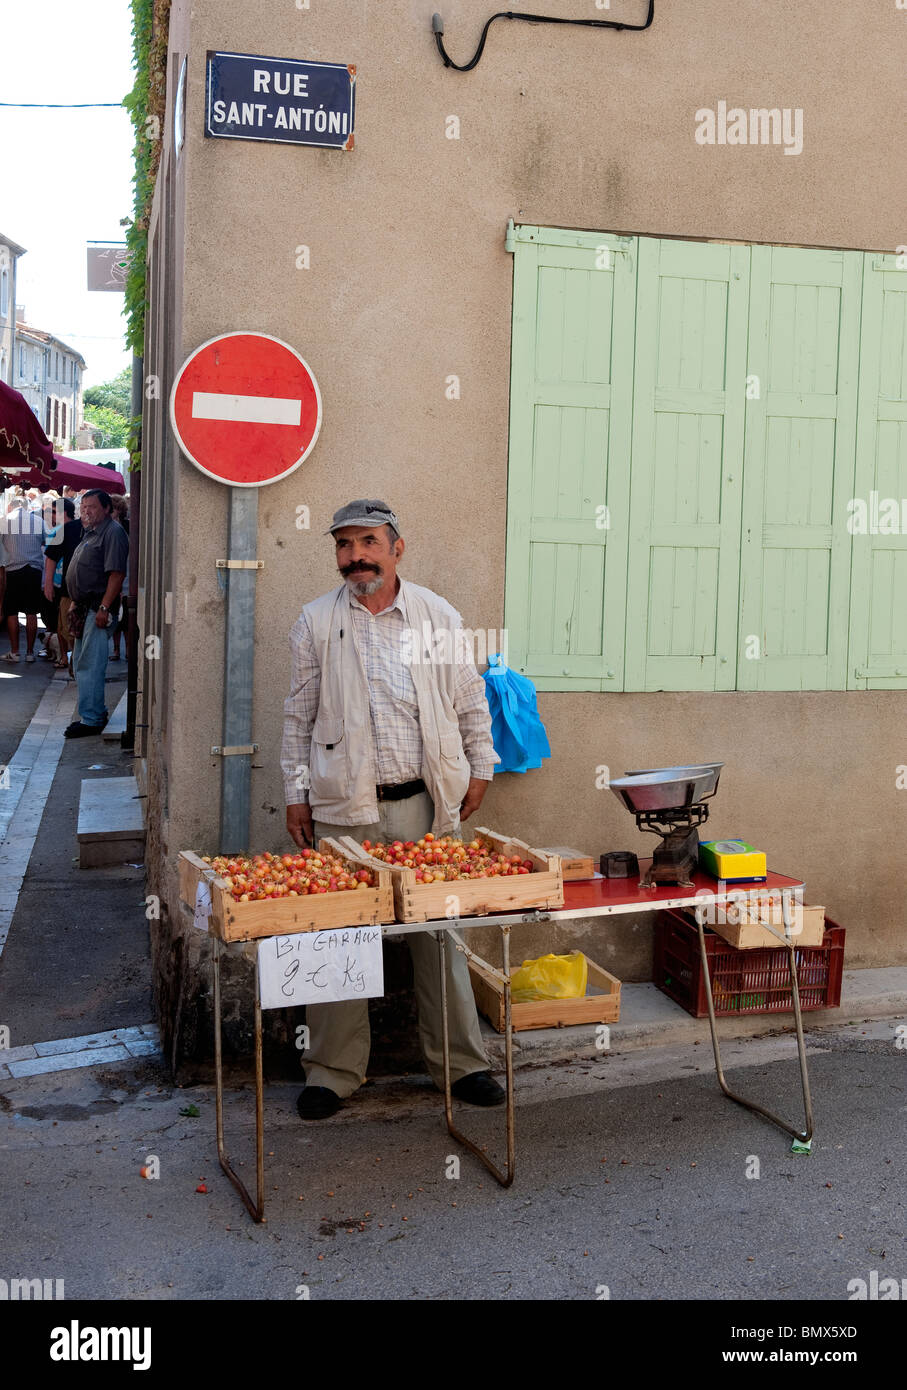 Market trader selling cherries in Olonzac in the Aude region, South of France Stock Photo